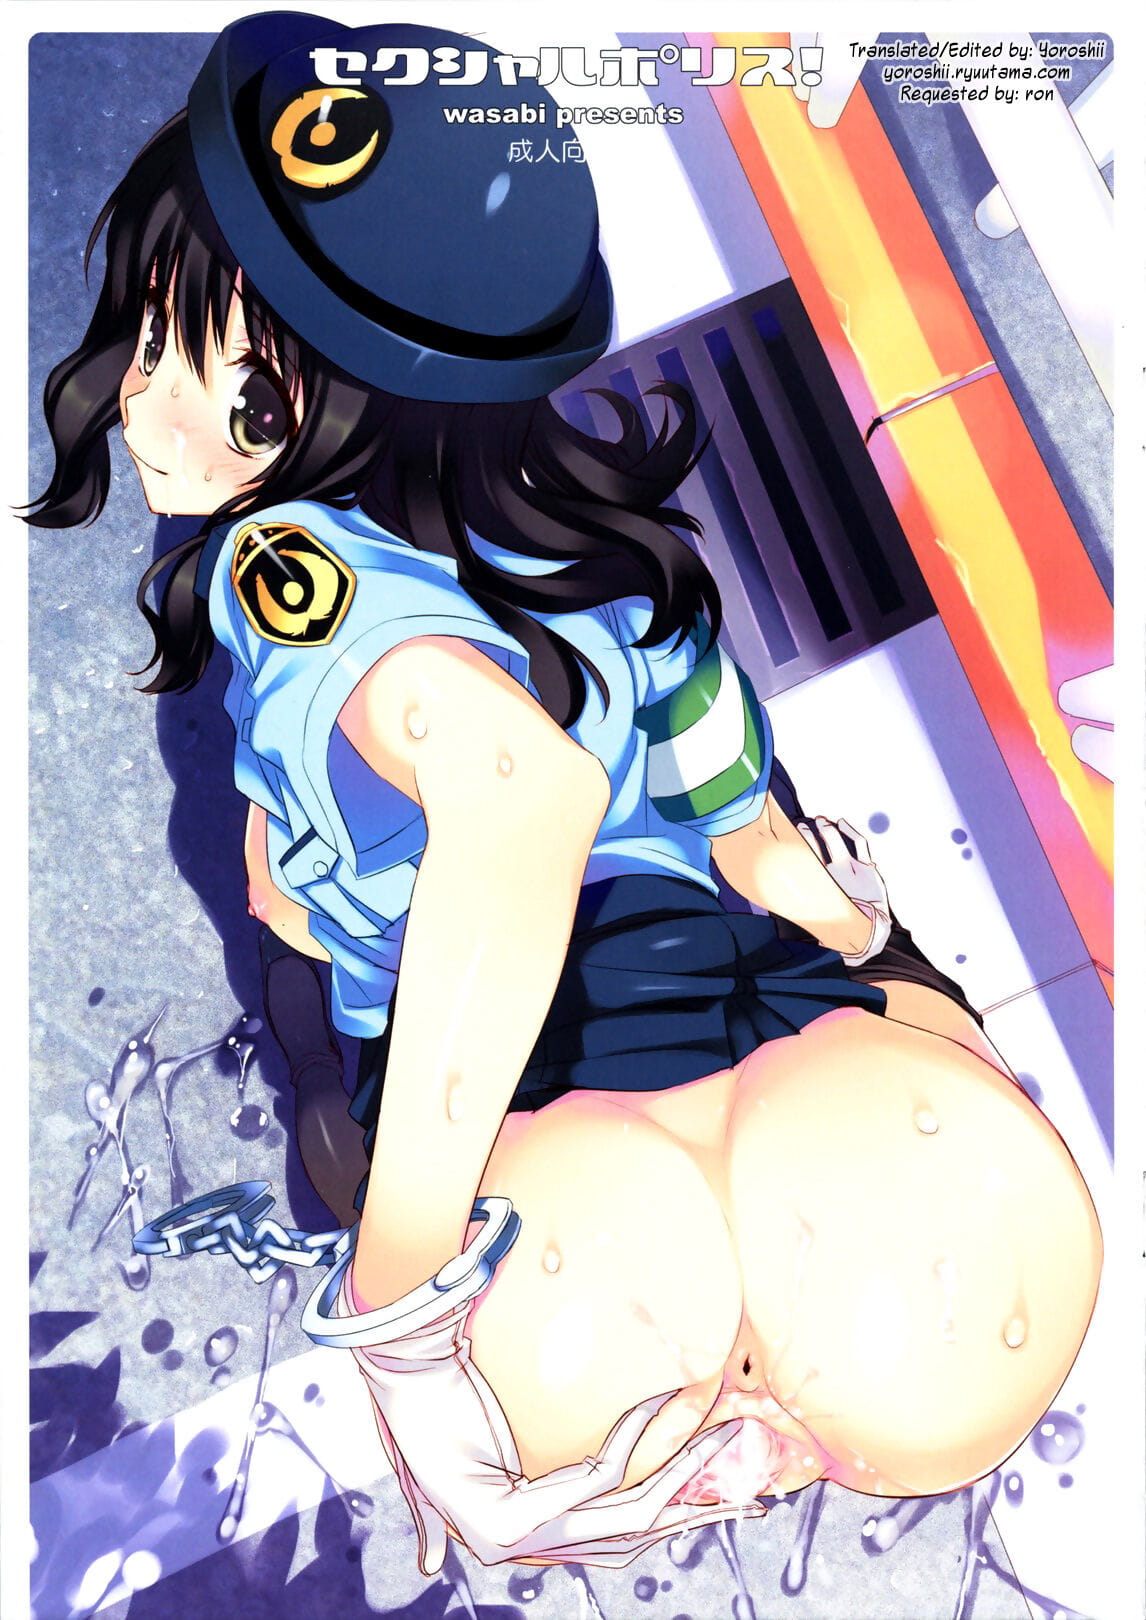 c79 wasabi tatami seksuele police! portugees br